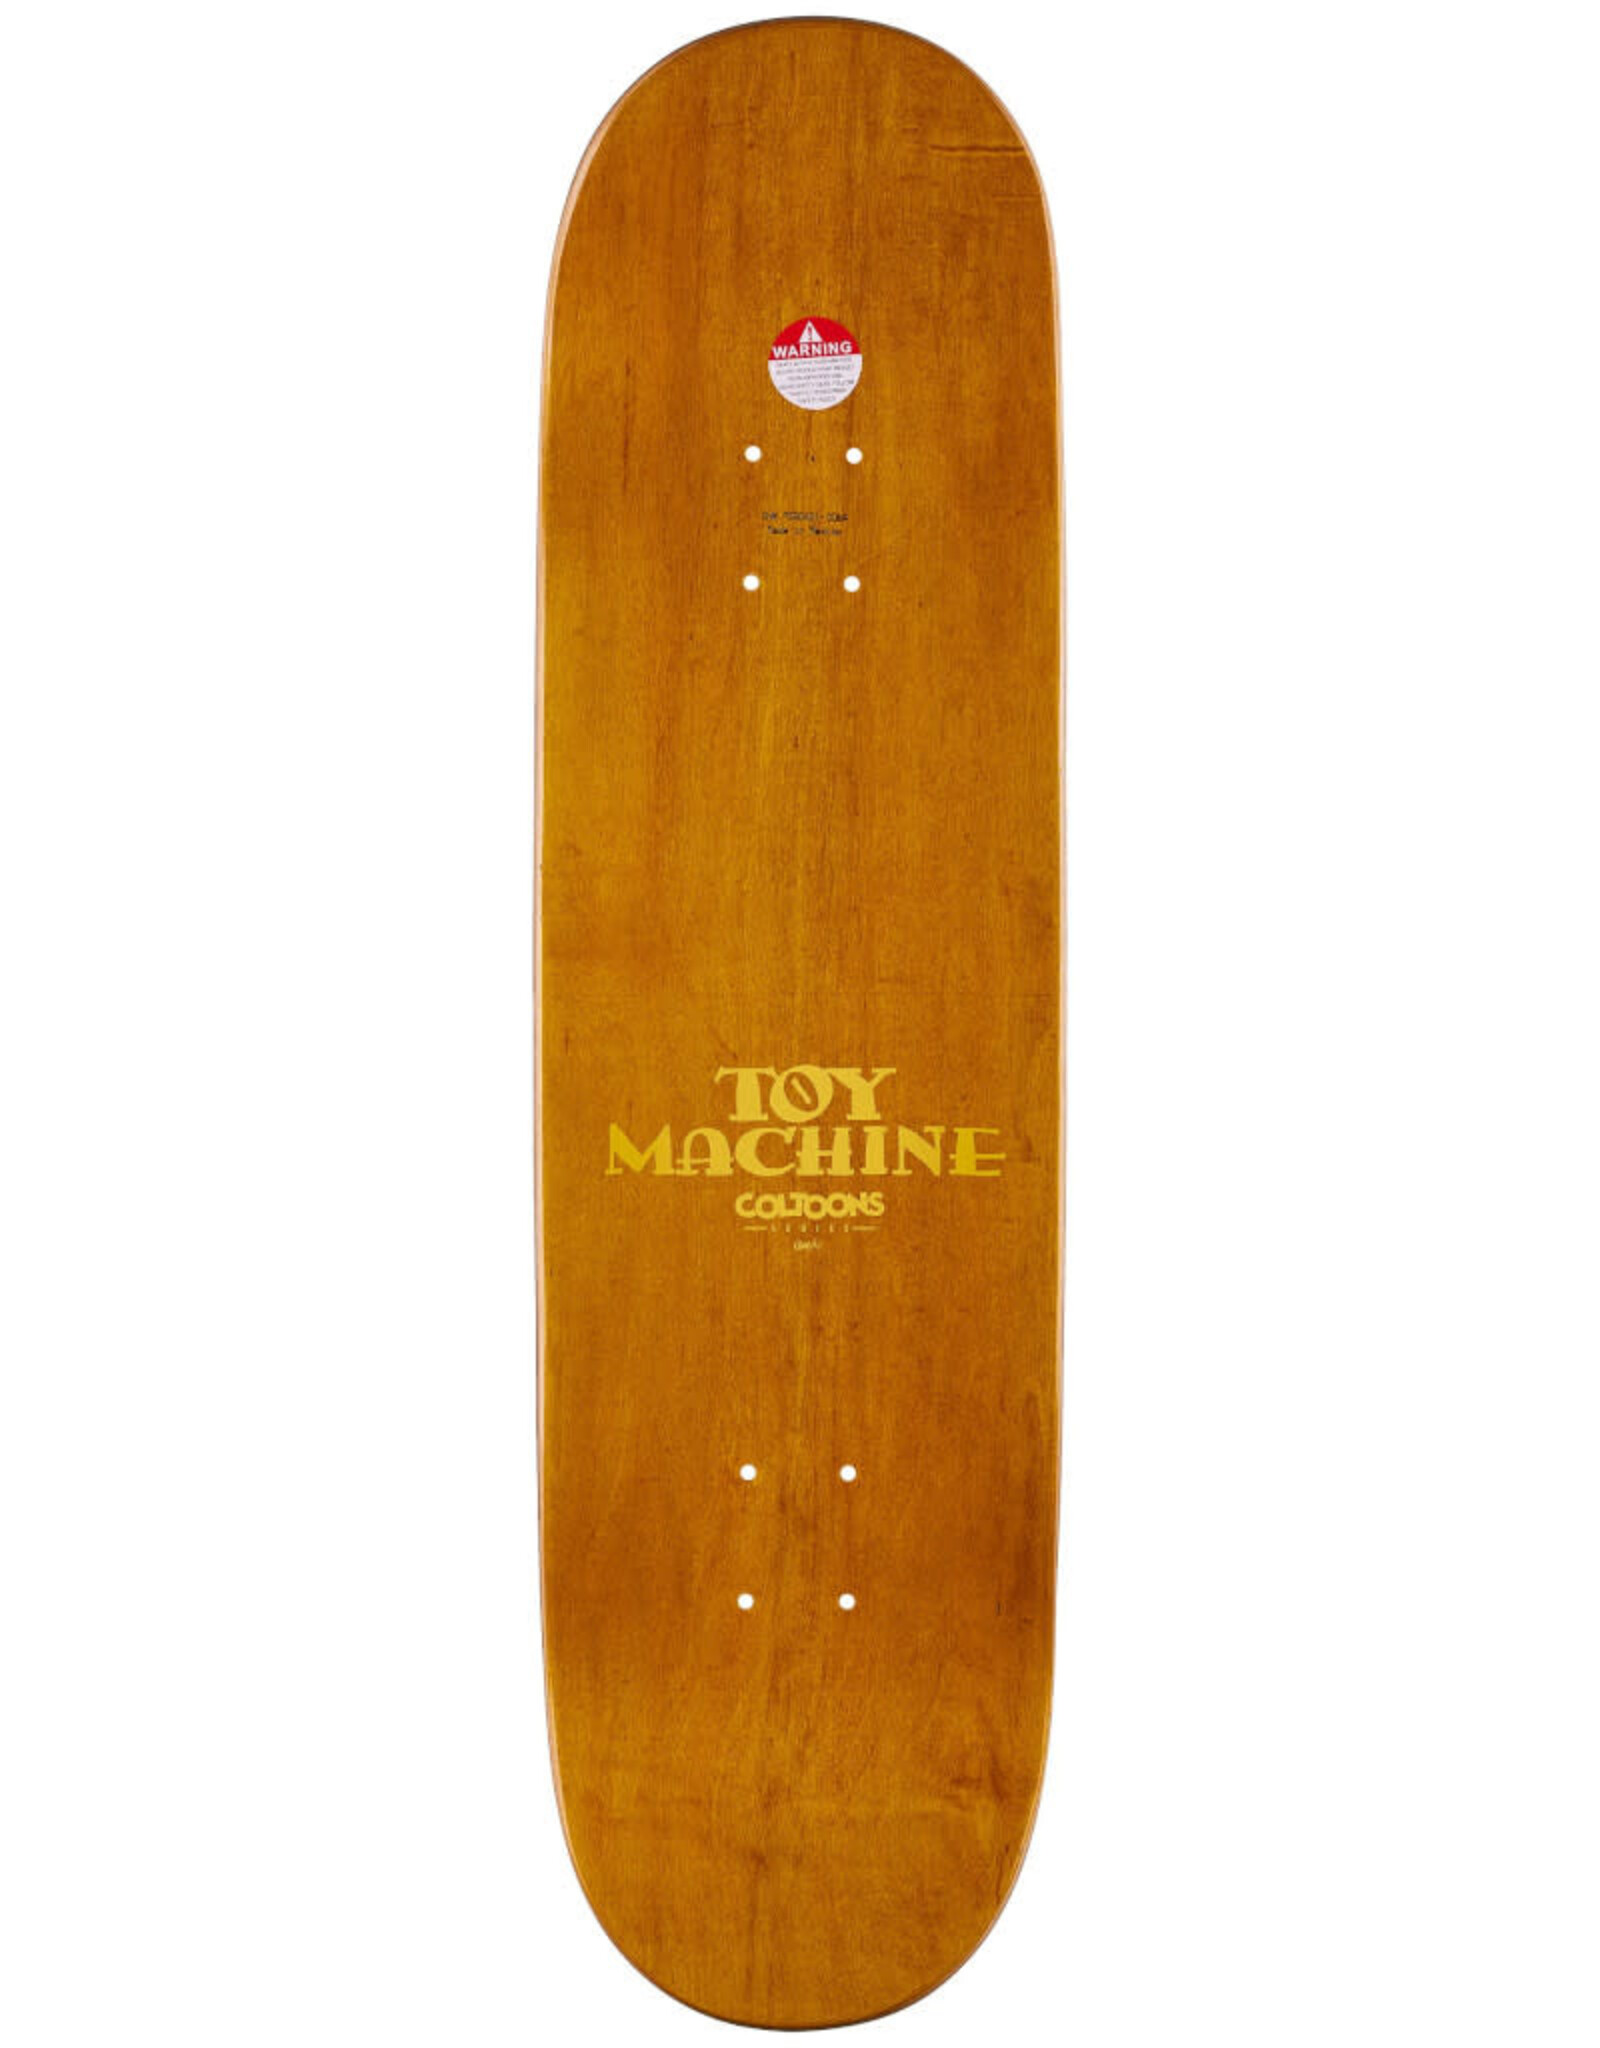 Toy Machine Toy Machine Deck Jeremy Leabres Toons (8.5)